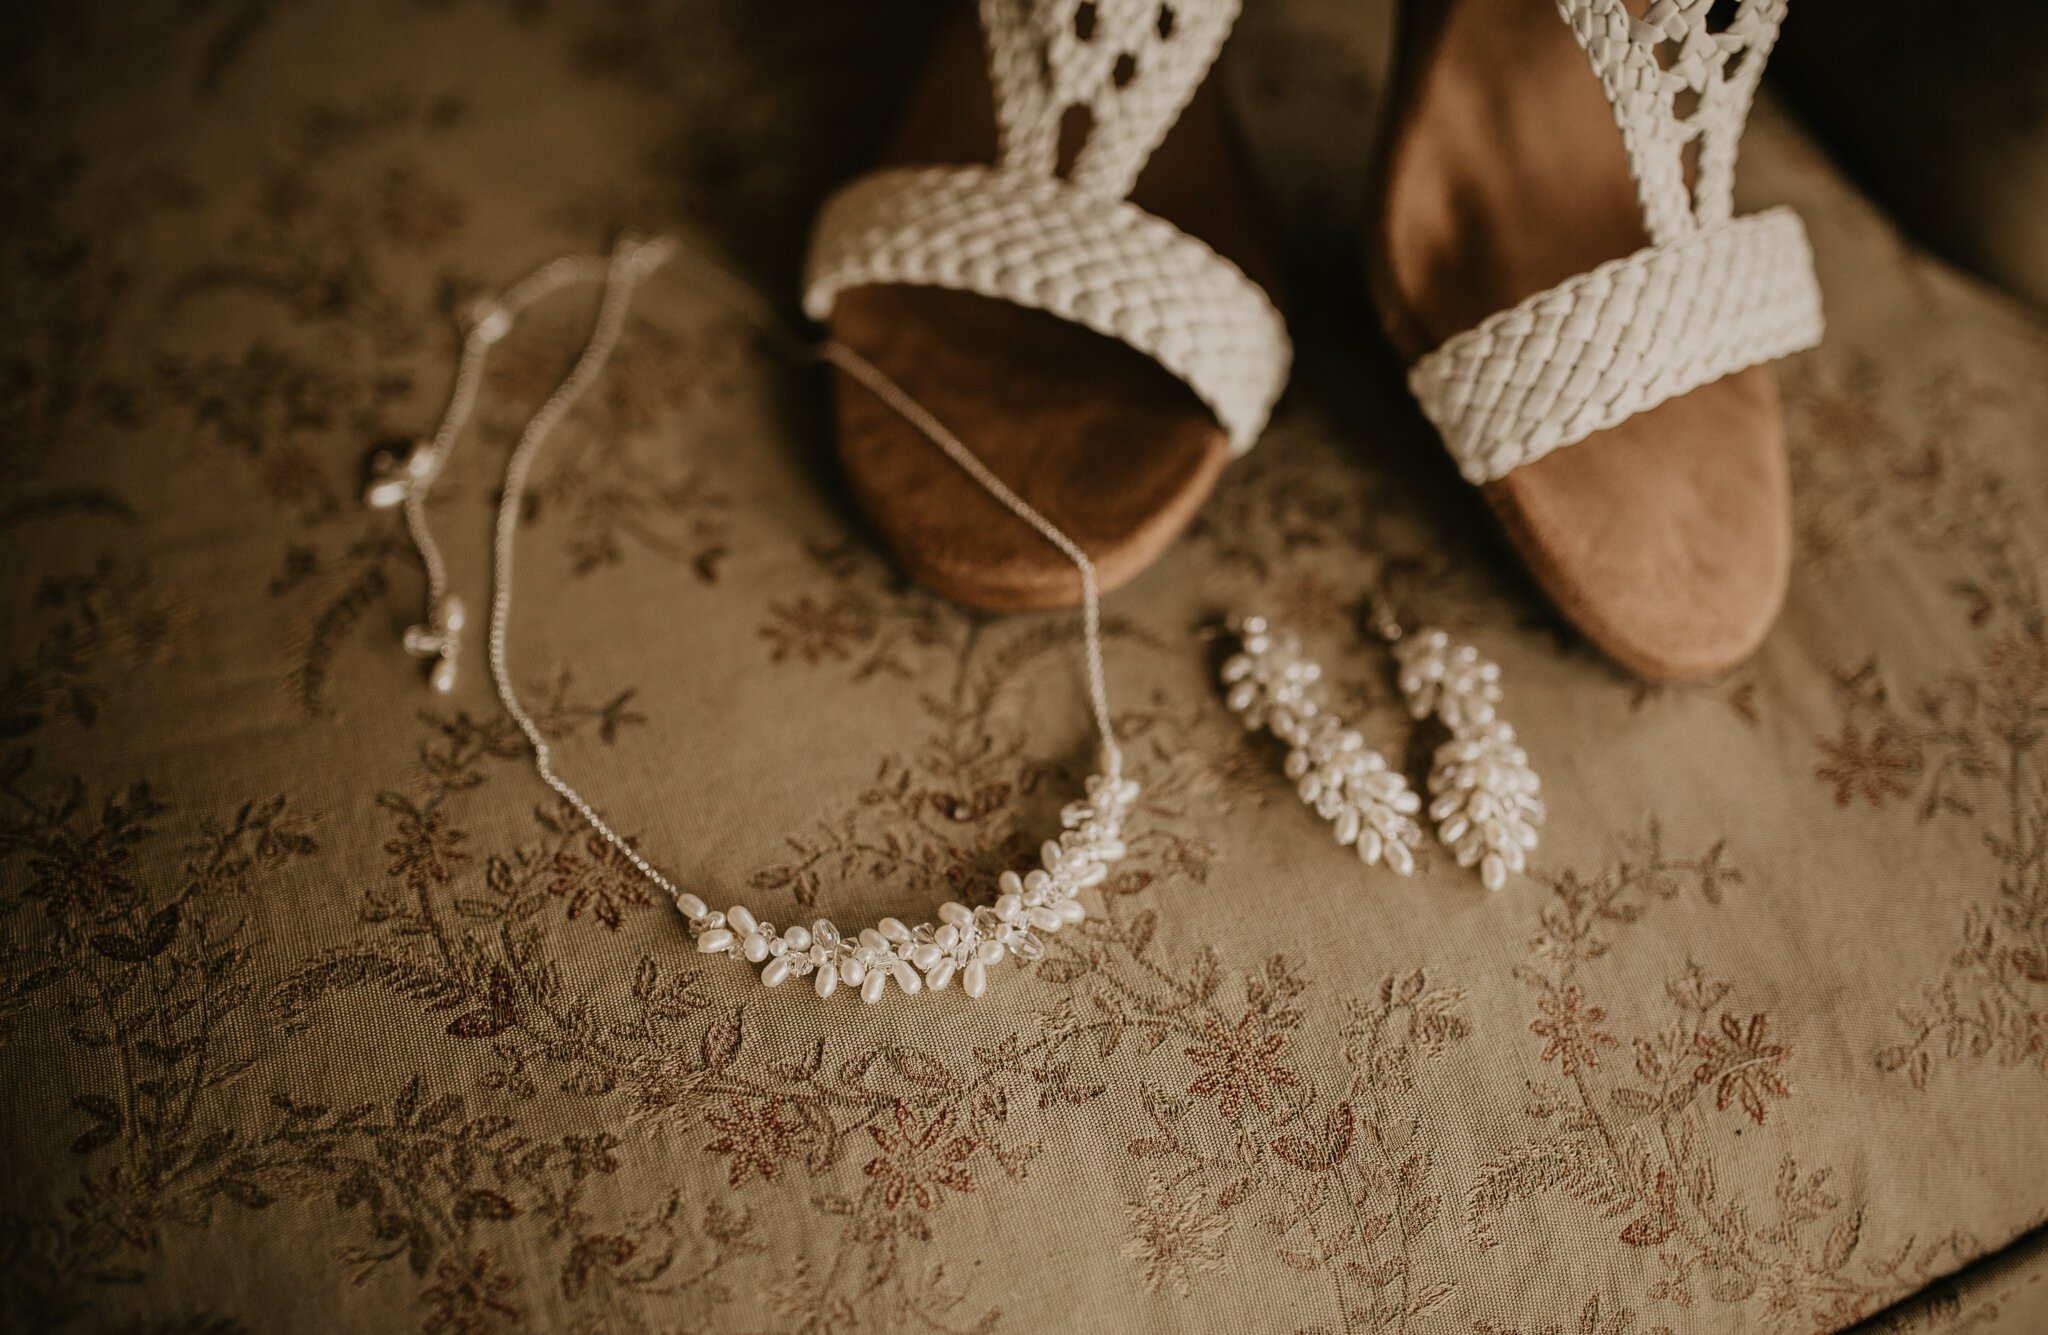  Brides jewelry and shoes for her wedding day 